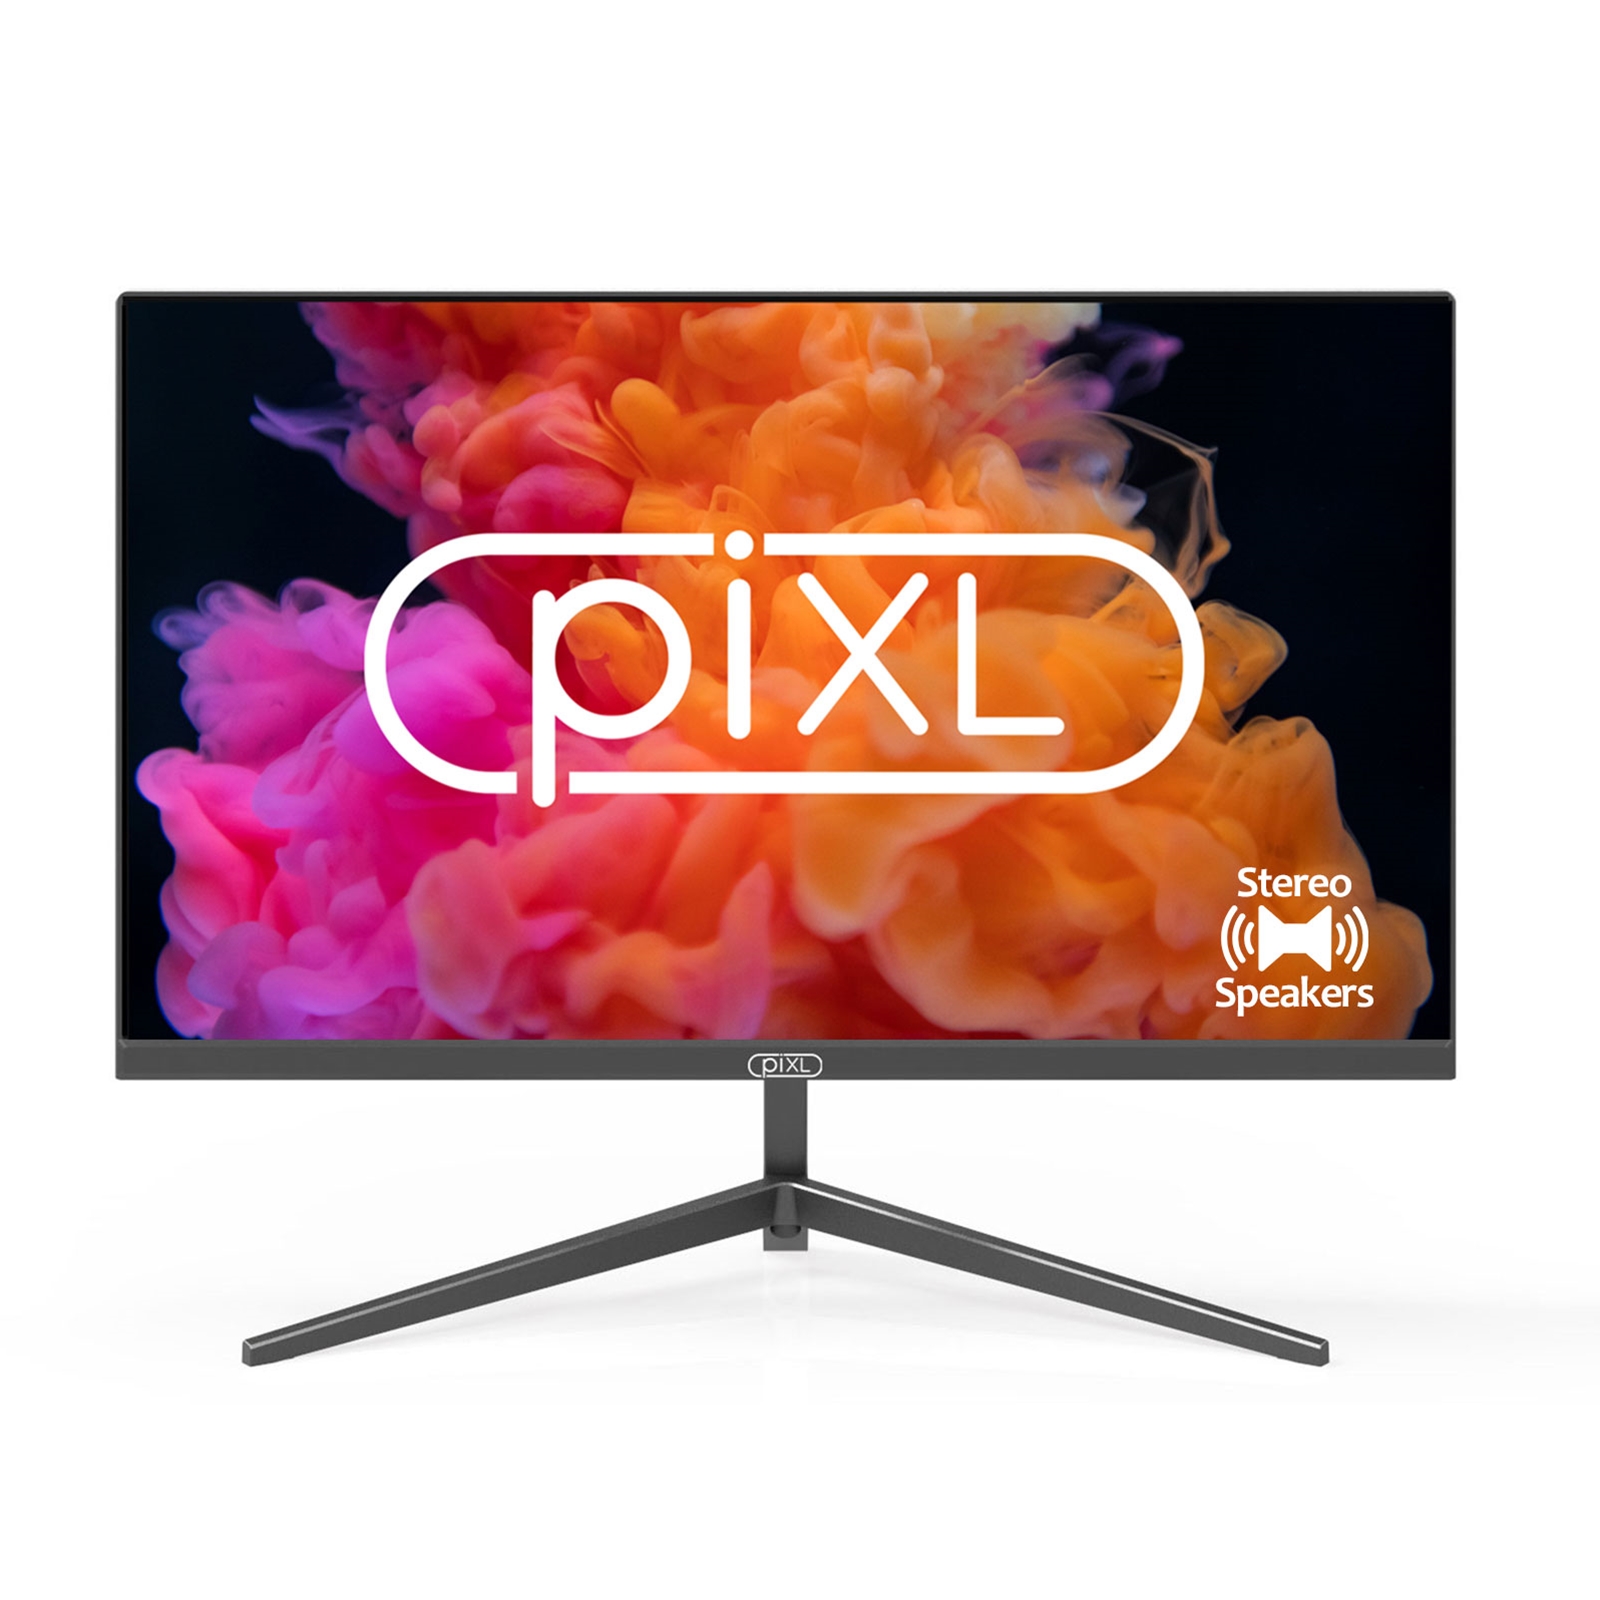 piXL PXD24VH 24 Inch Frameless Monitor, Widescreen, 6.5ms Response Time, 60Hz Refresh Rate, Full HD 1920 x 1200, 16:10 Aspect Ratio, VGA, HDMI, Internal PSU, Speakers, 16.7 Million Colour Support, Black Finish